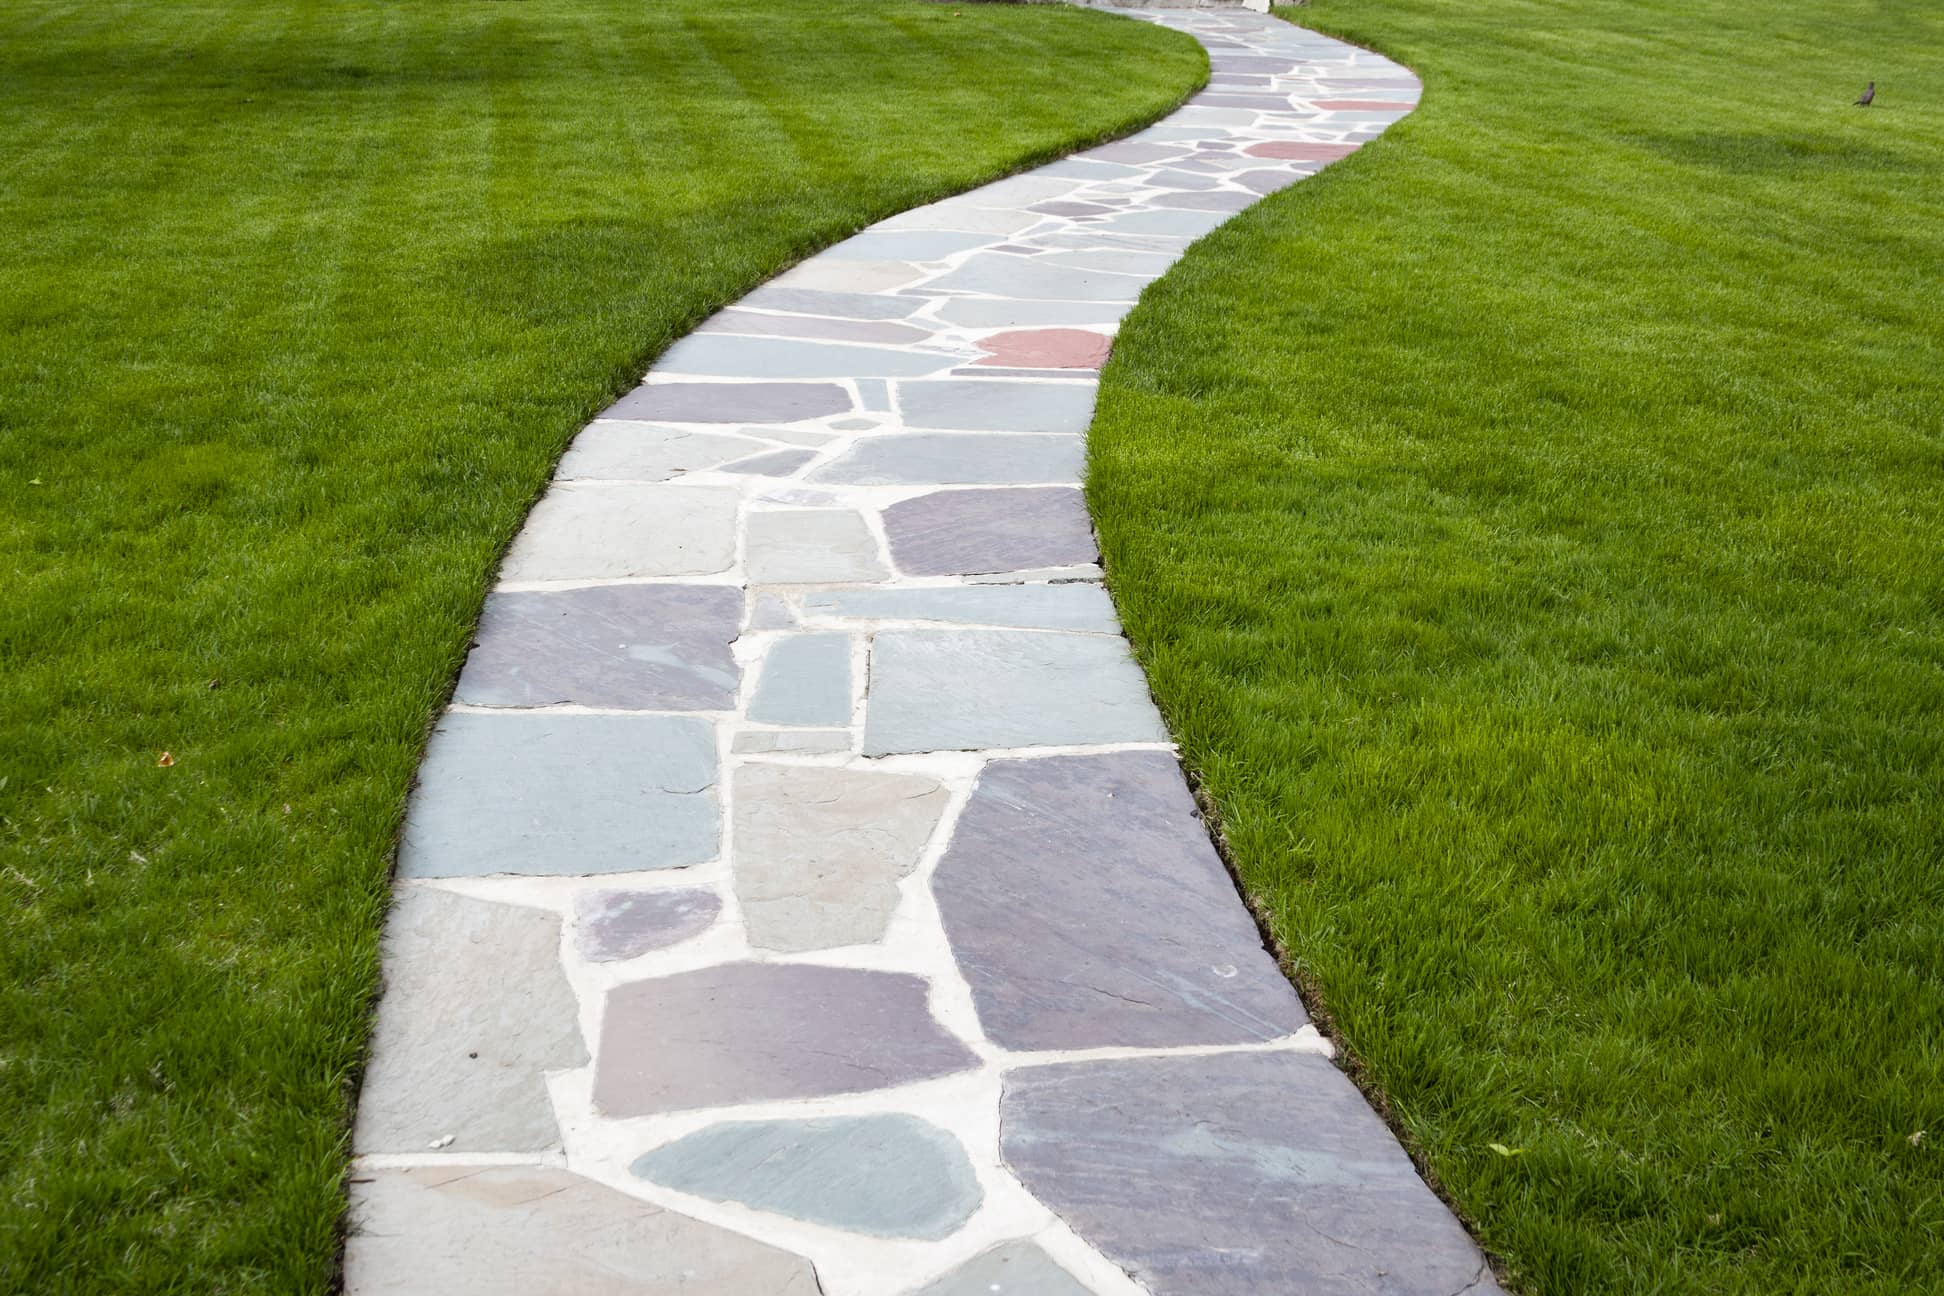 This is an image of a stone walkway with concrete.